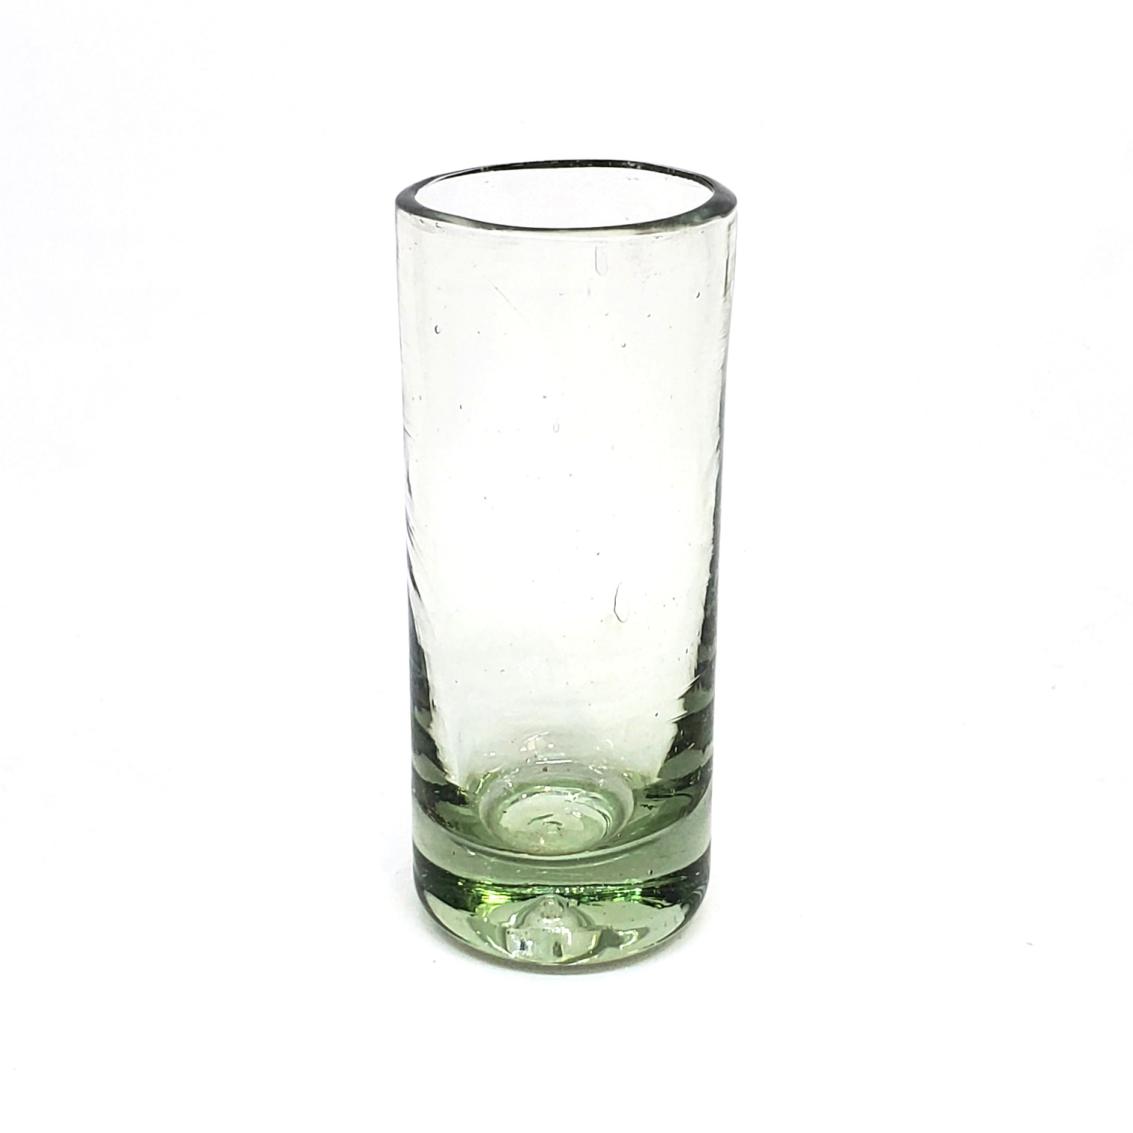 Sale Items / Clear 2 oz Tequila Shot Glasses  / Sip your favourite tequila or mezcal with these iconic clear handcrafted shot glasses.